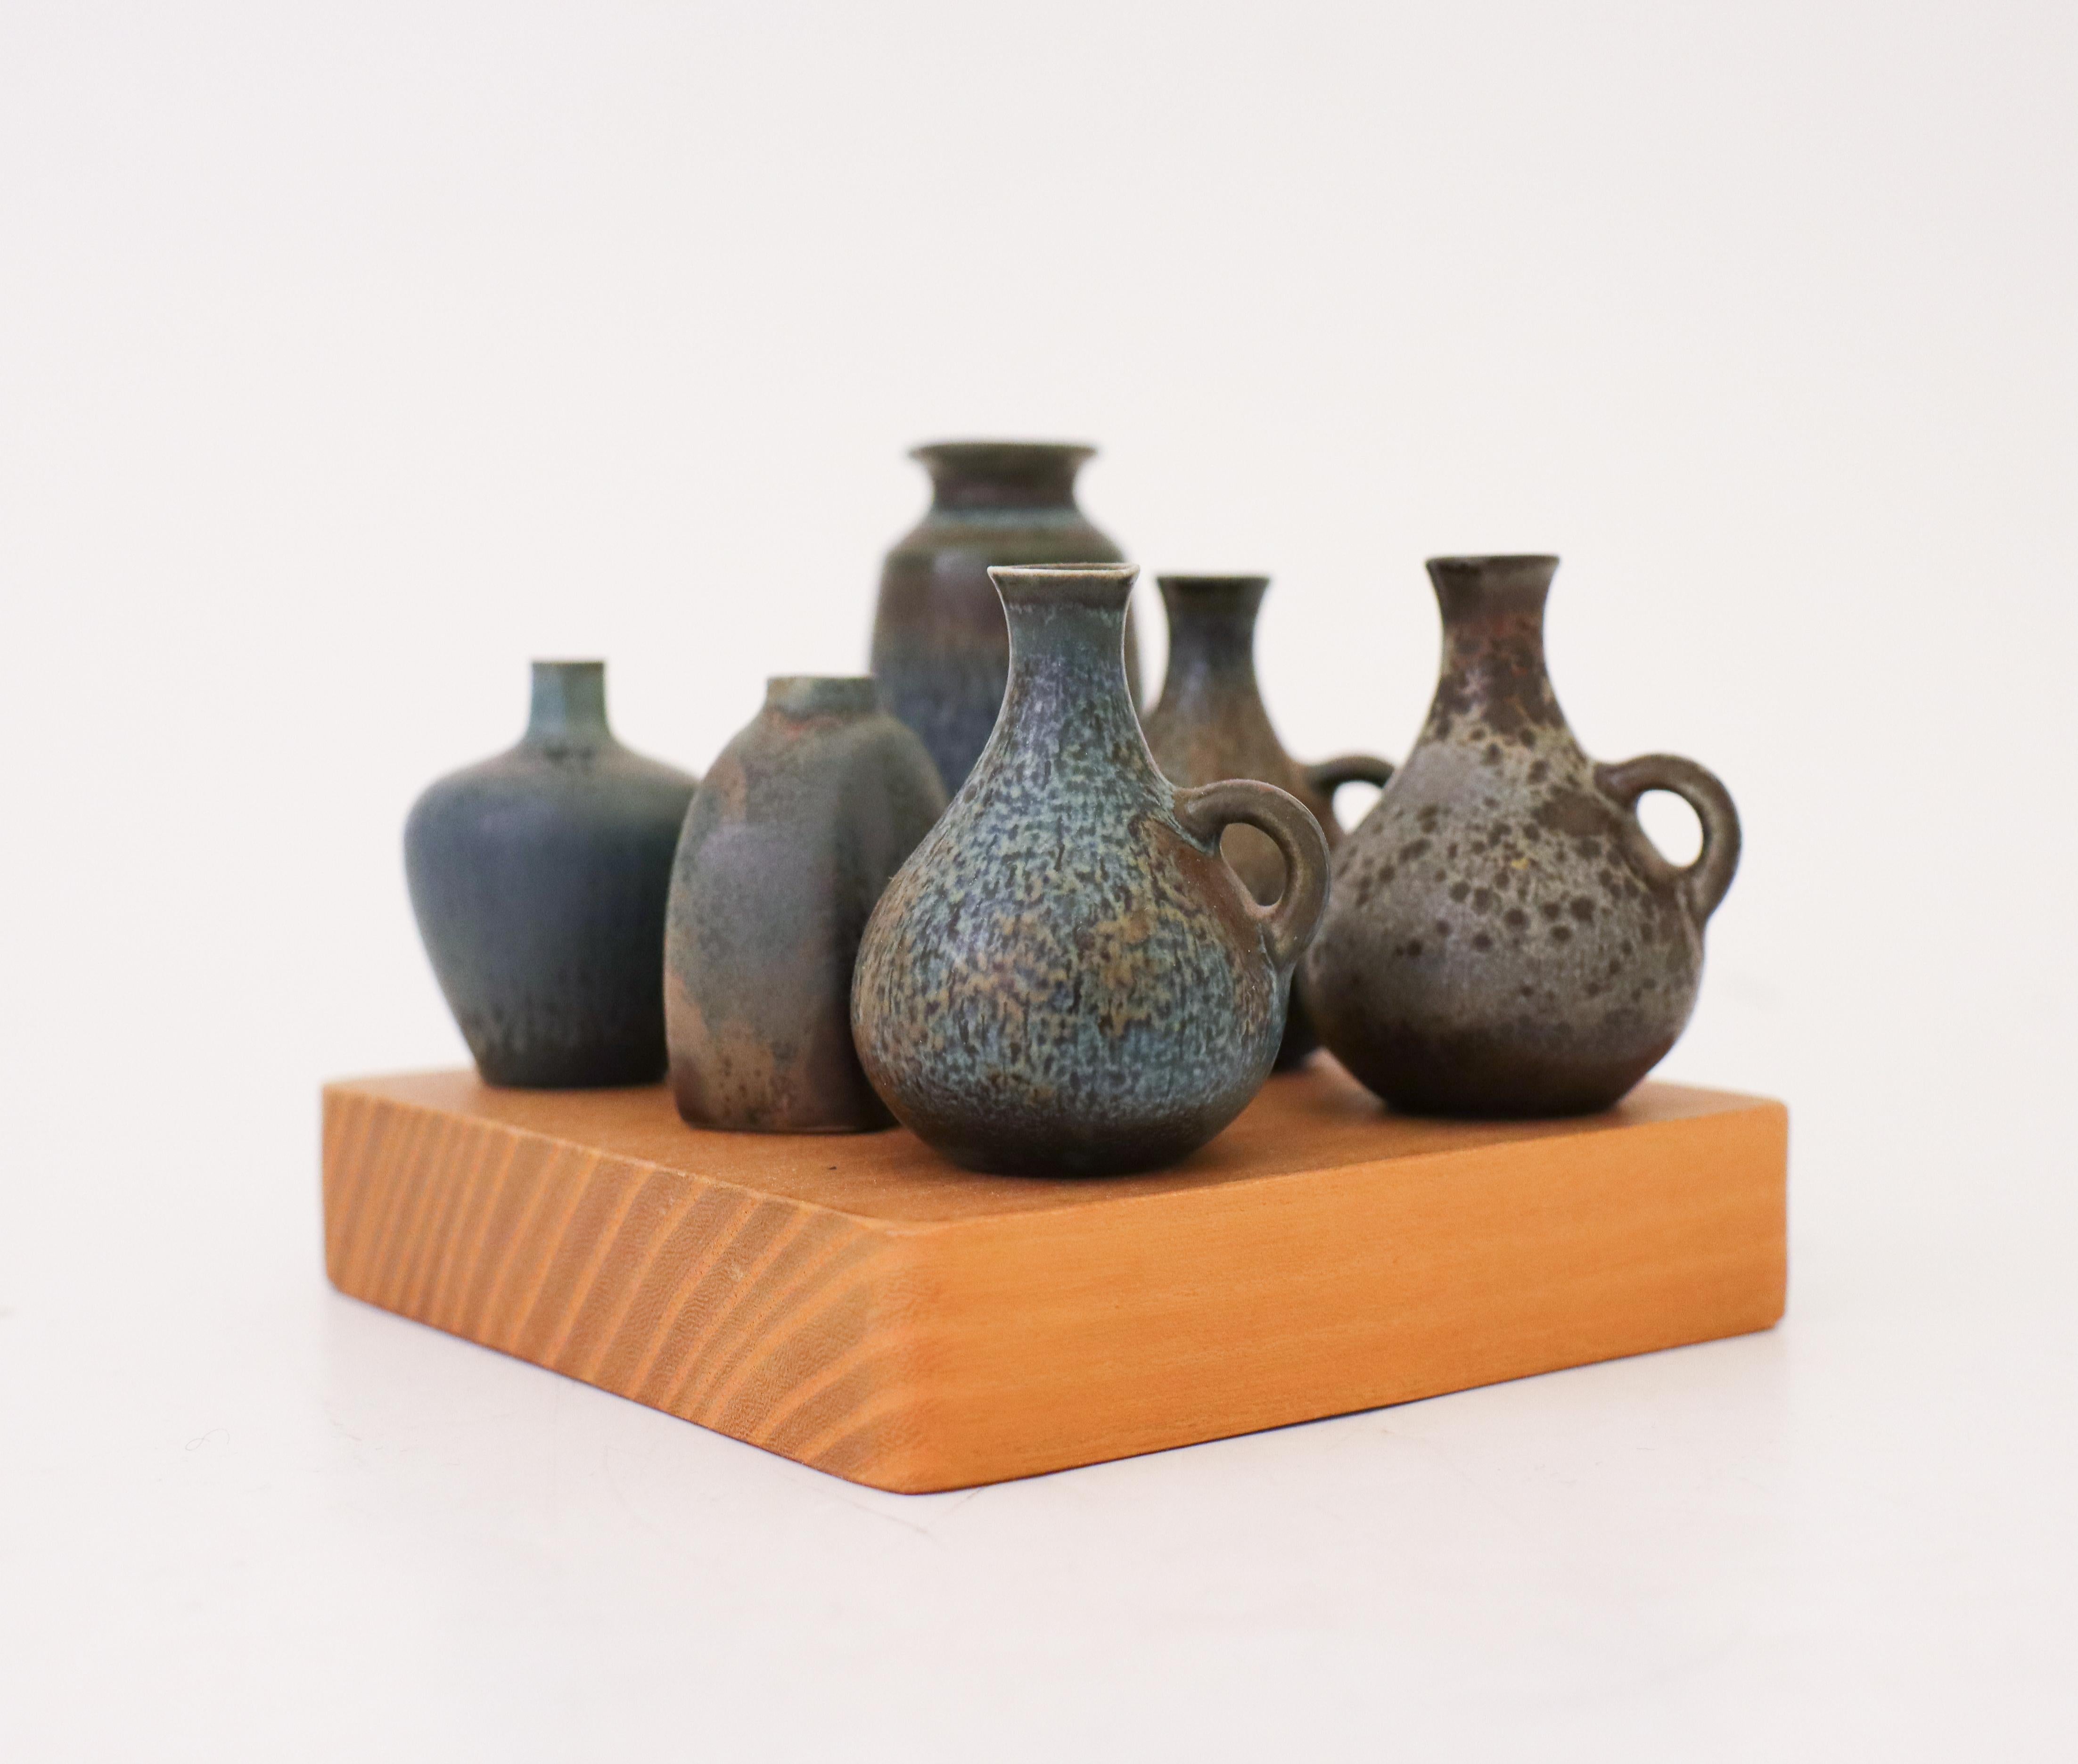 A cool set of 6 miniatures designed by Carl-Harry Stålhane at Rörstrand, they are between 4-6.5 cm high. They are all in excellent condition and marked as 1st quality. 

Carl-Harry Stålhane is one of the top names when it comes to midcentury